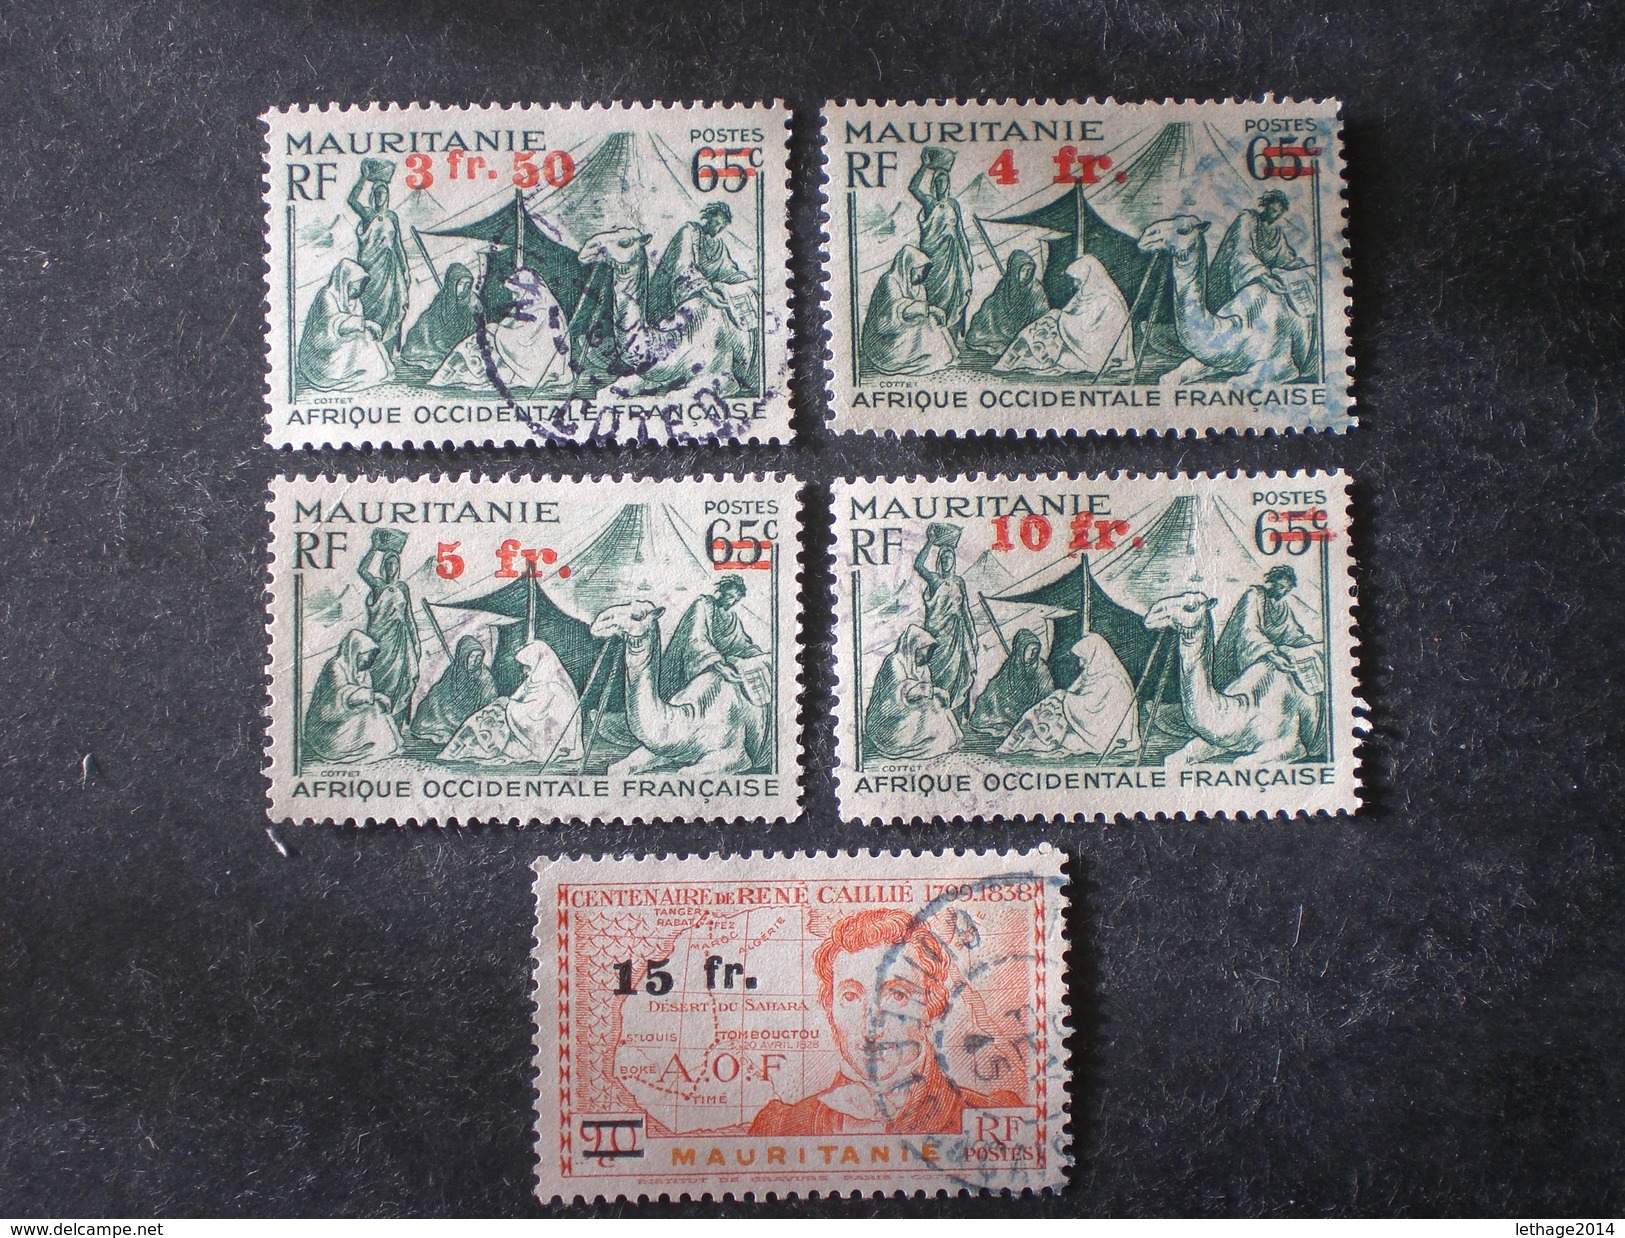 AOF MAURITANIA MAURITANIE موريتانيا Mauritanië 1944 Issues Of 1938 And 1939 Surcharged - Used Stamps